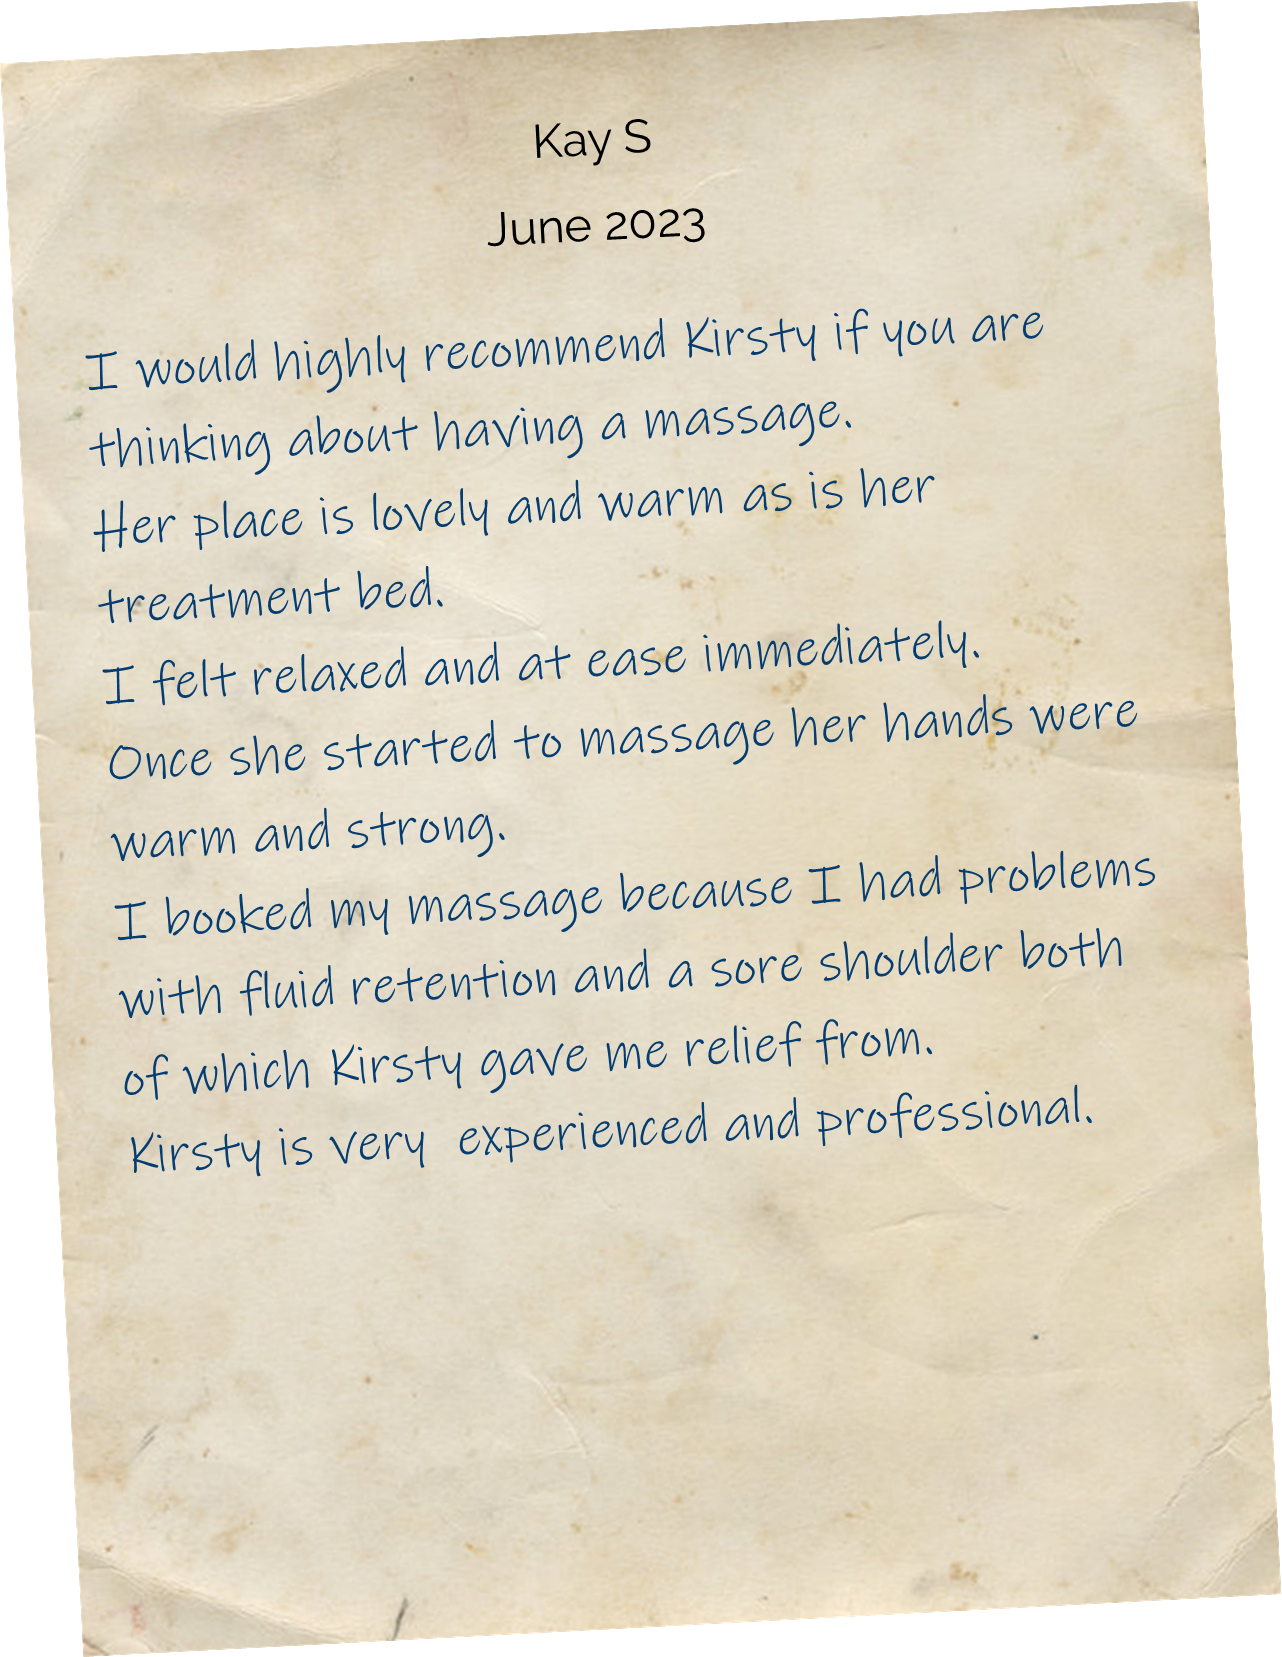 I would highly recommend Kirsty If you are thinking about having a massage. Her place is lovely and warm as is her treatment bed. I felt relaxed and at ease immediately. Once she started to massage her hands were warm and strong. I booked my massage because I had problems with fluid retention and a sore shoulder both of which Kirsty gave me relief from. Kirsty is very  experienced and professional.